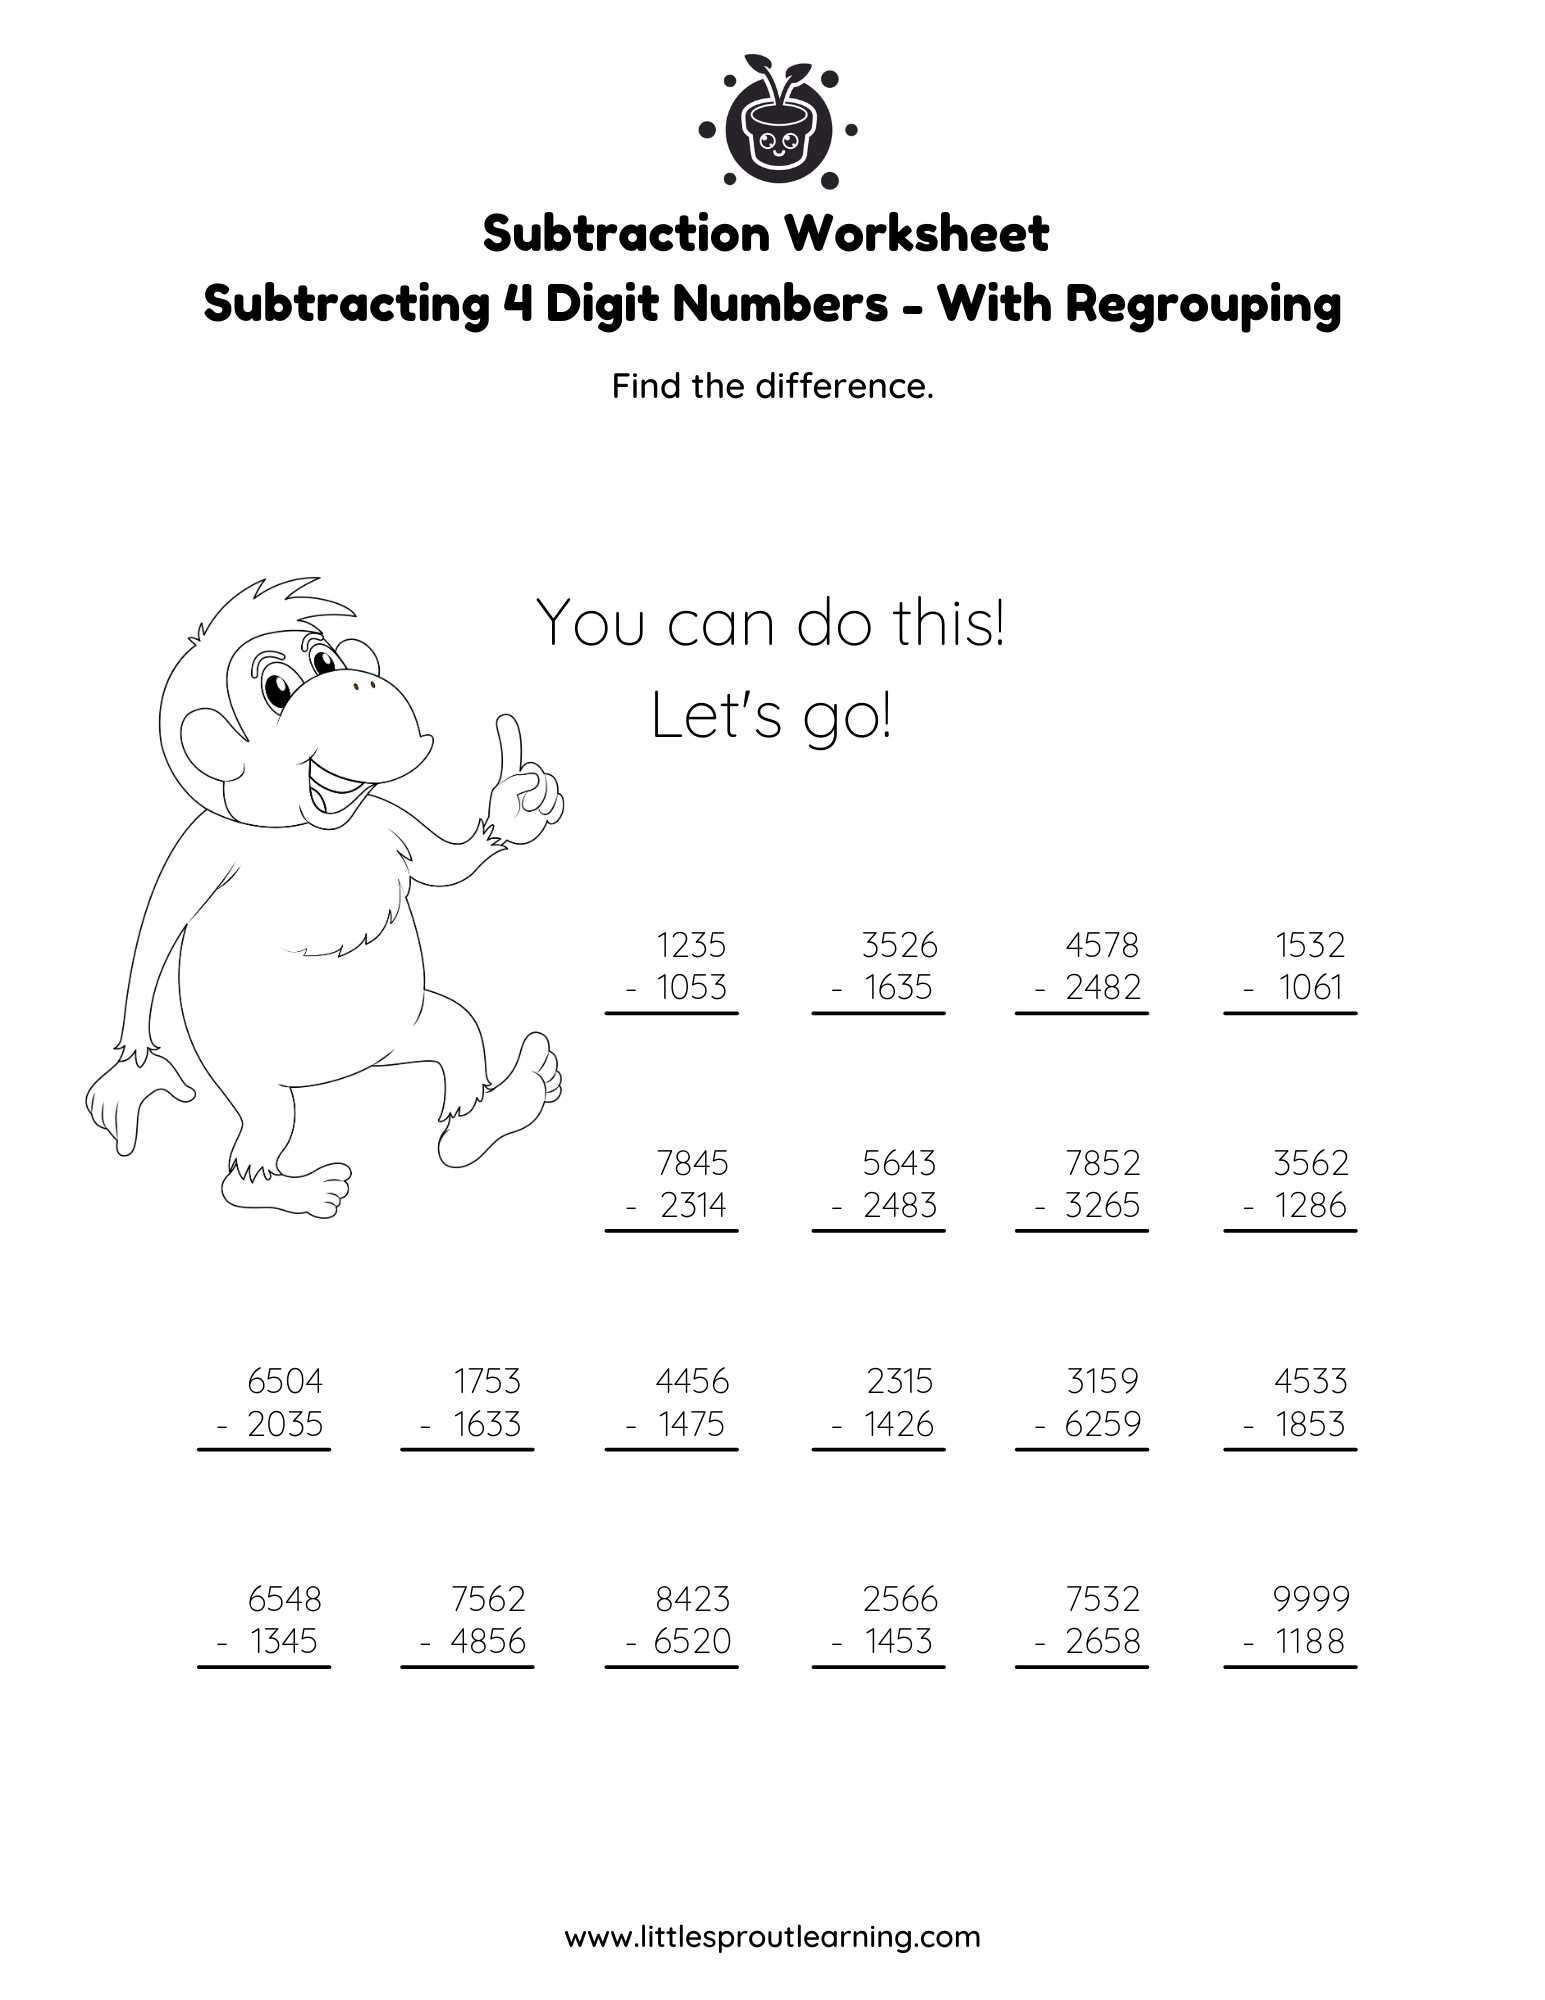 Subtracting 4 Digit Numbers – With Regrouping